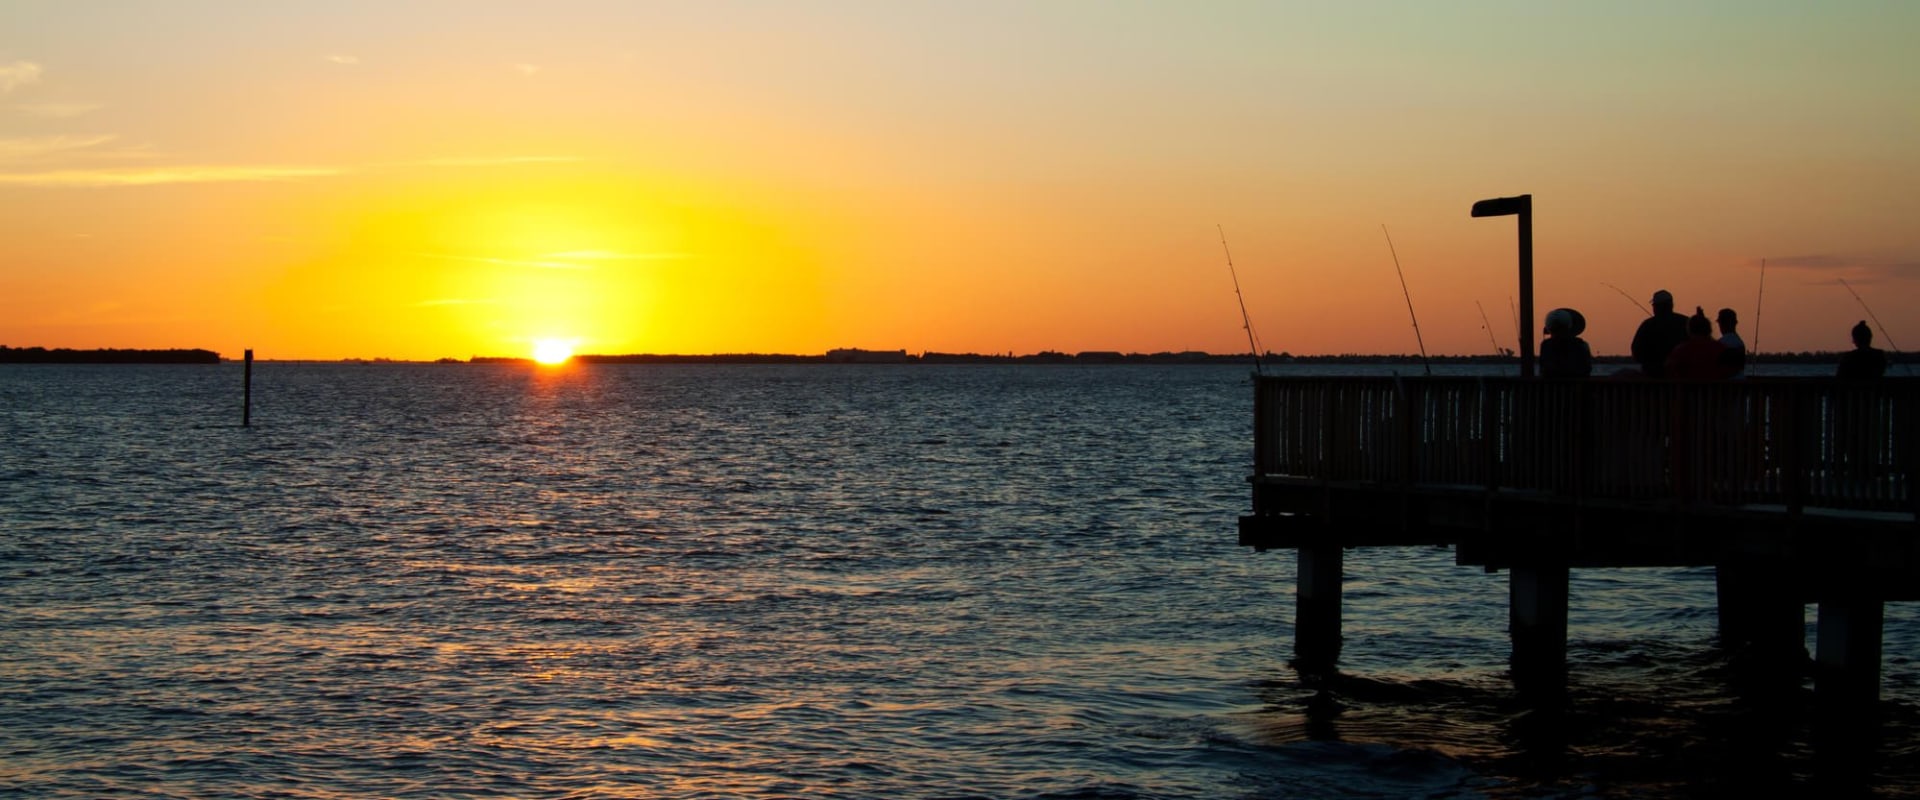 The Best Time of Year for Outdoor Sports in Cape Coral, FL